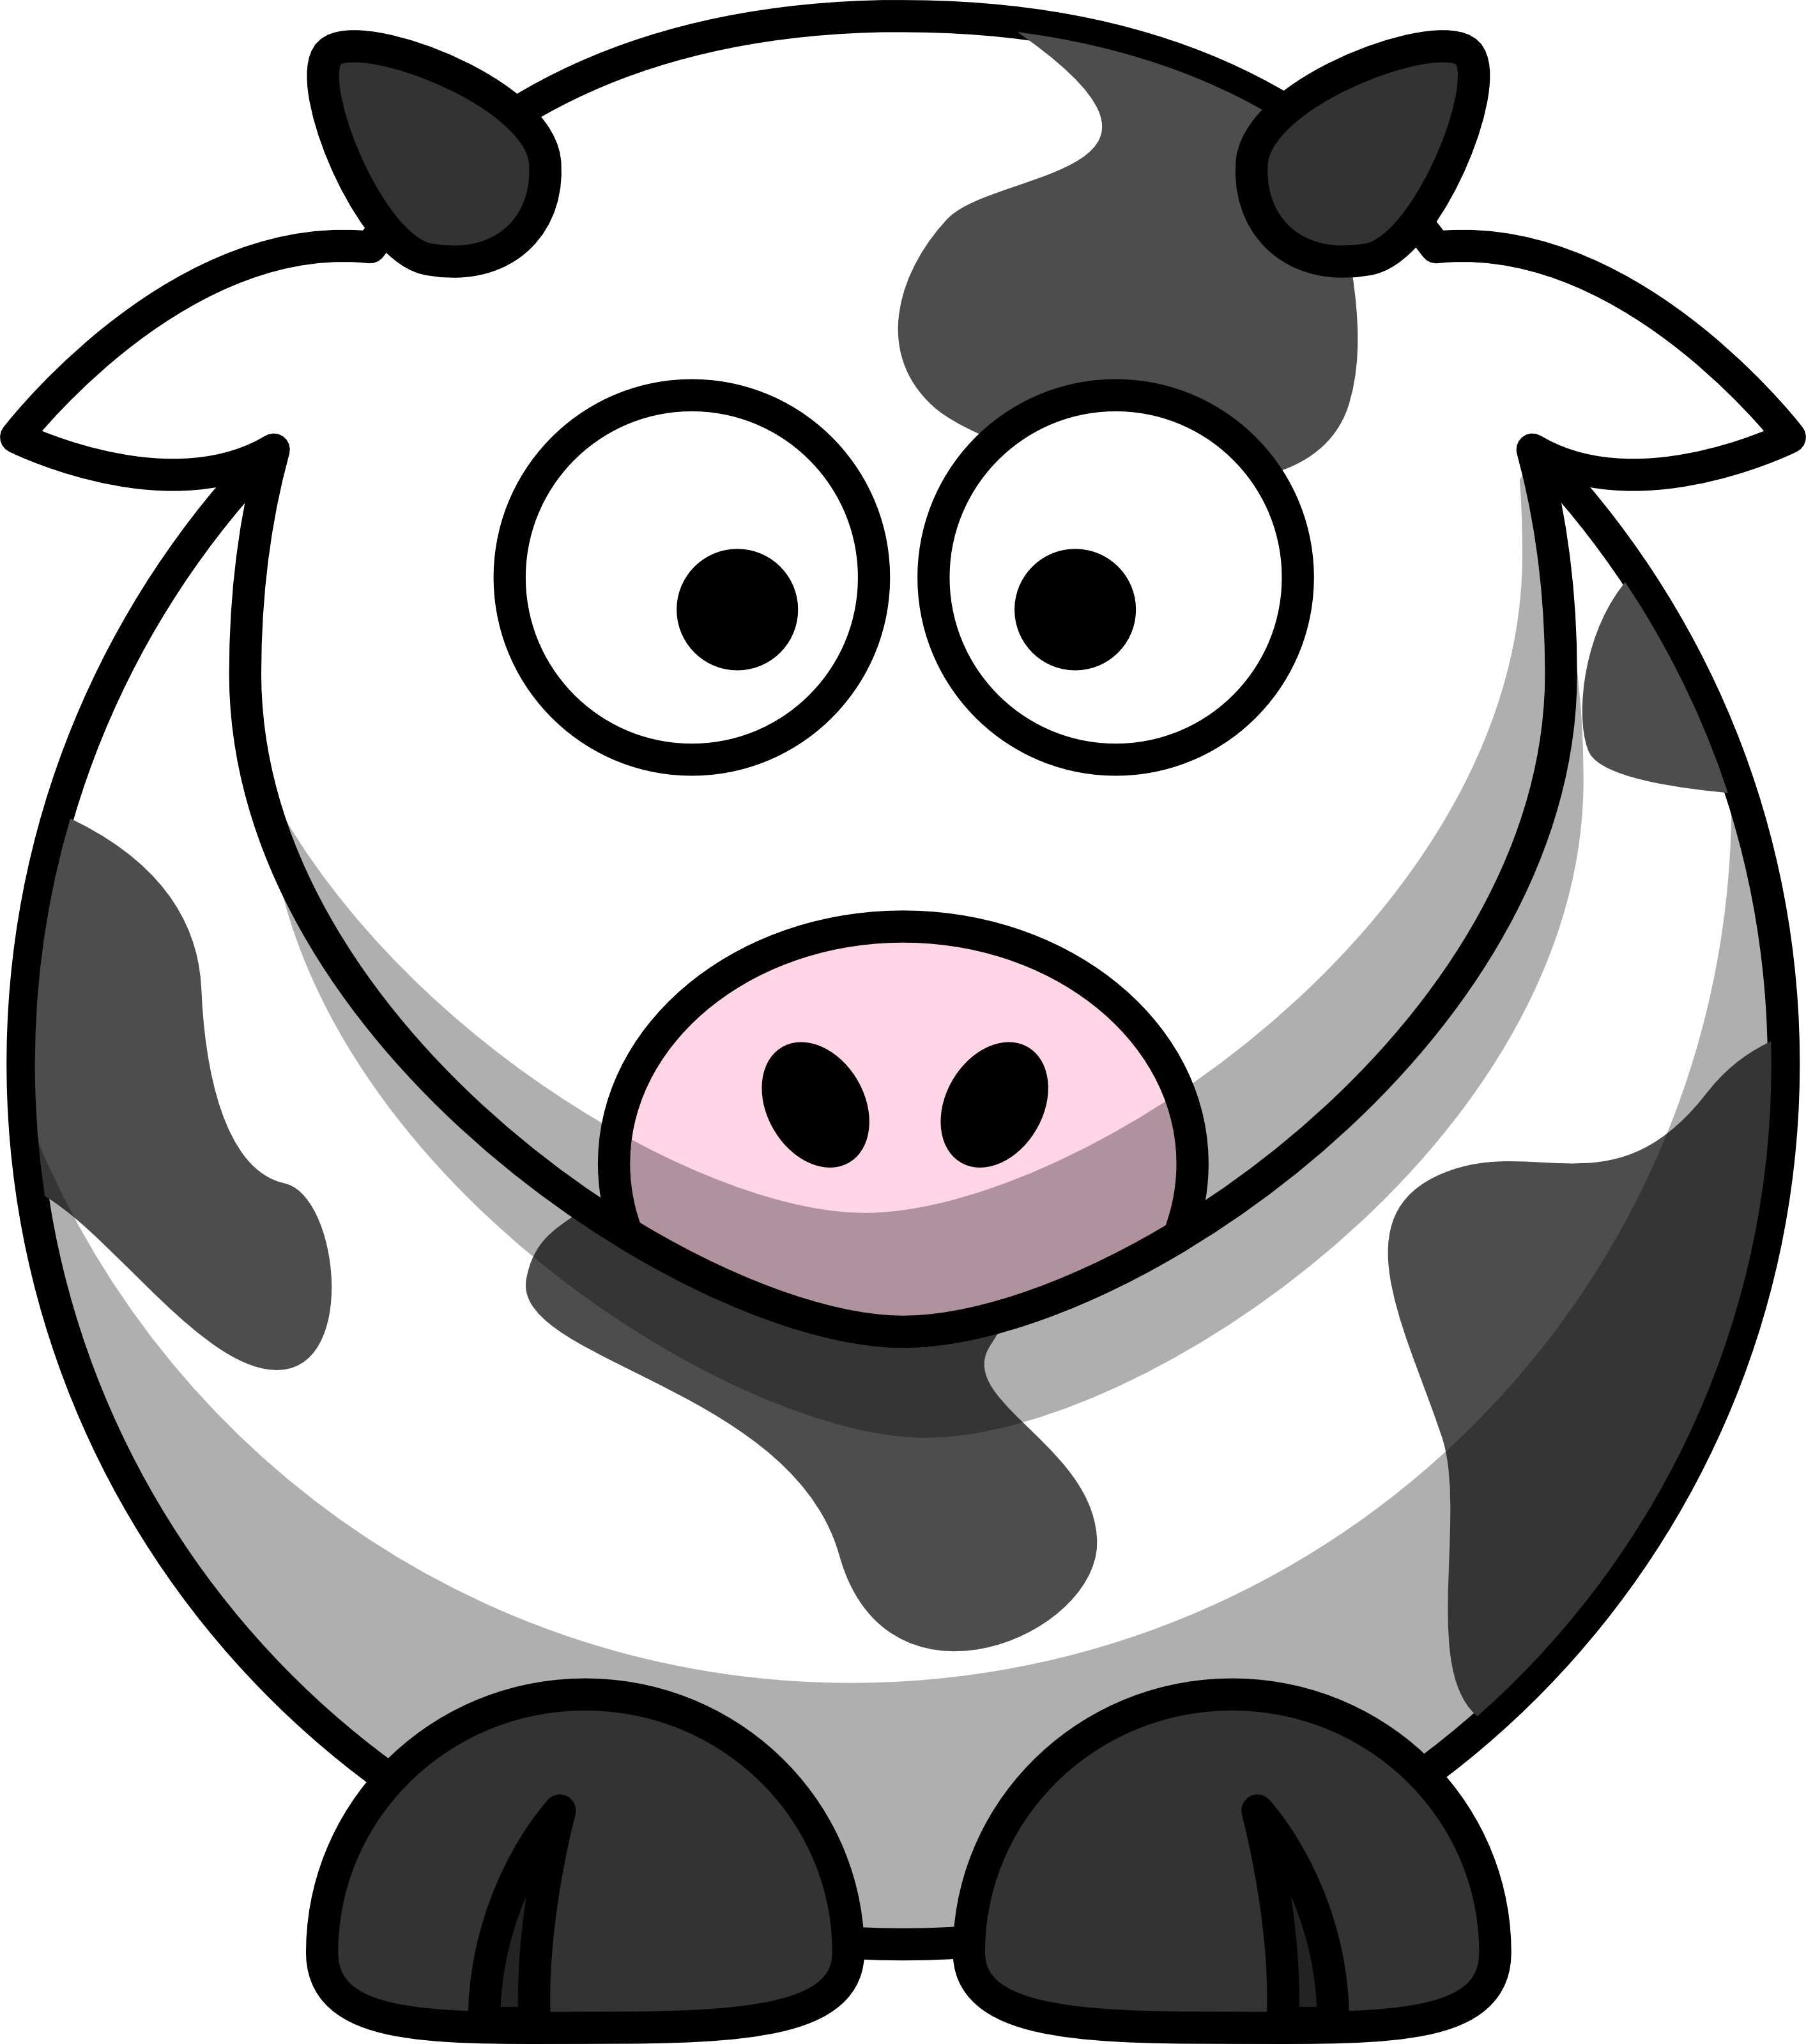 Hog clipart common animal. Google image result for